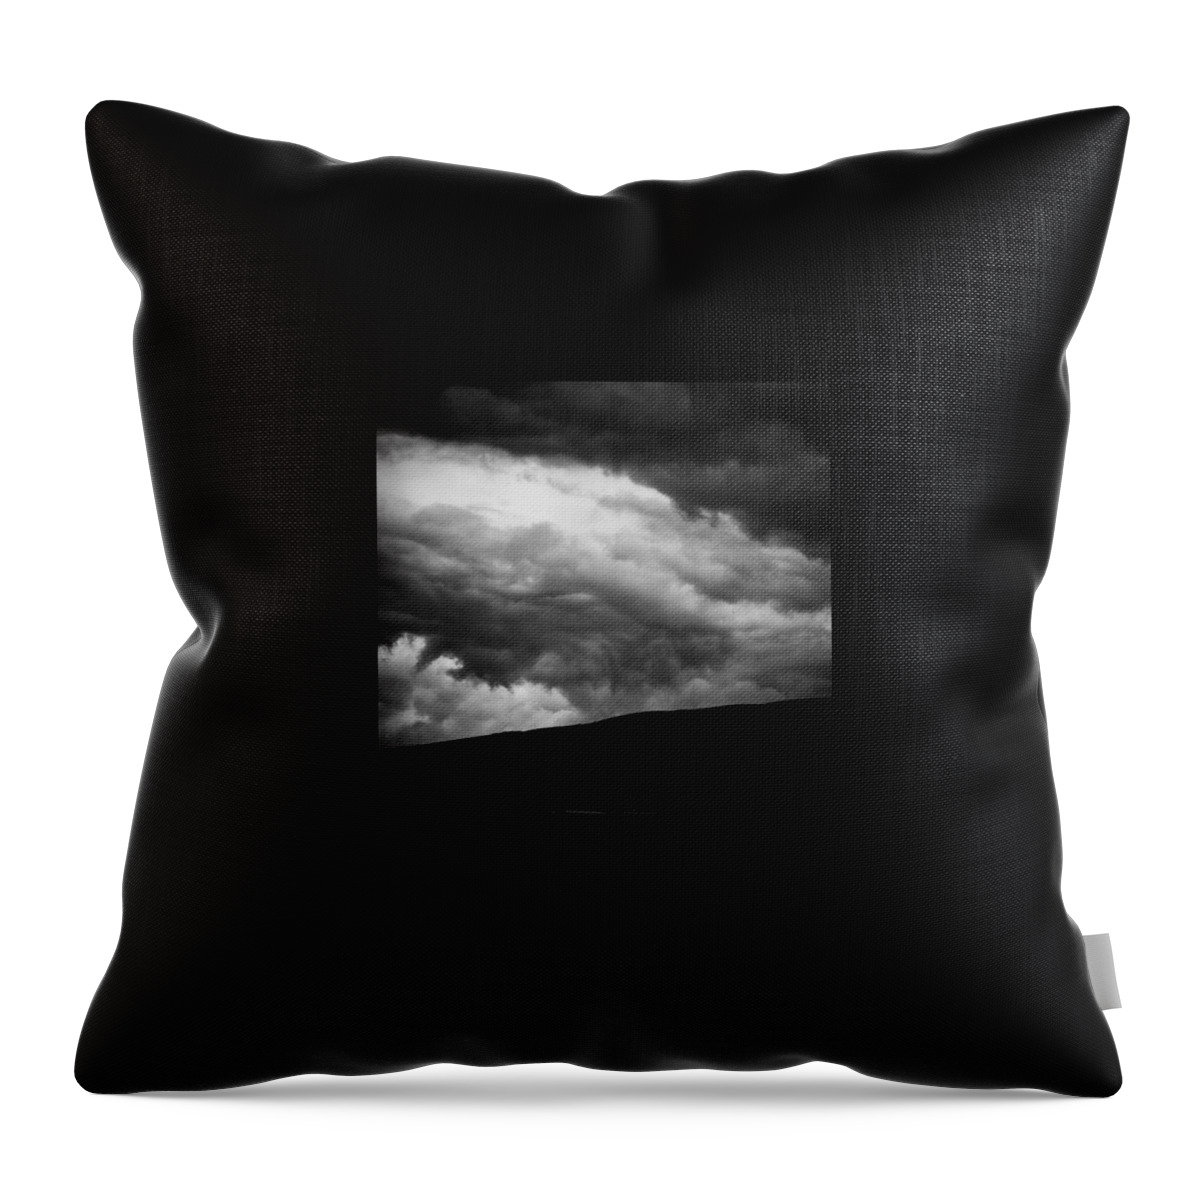 Beautiful Throw Pillow featuring the photograph When The Clouds Come Rolling In by Aleck Cartwright